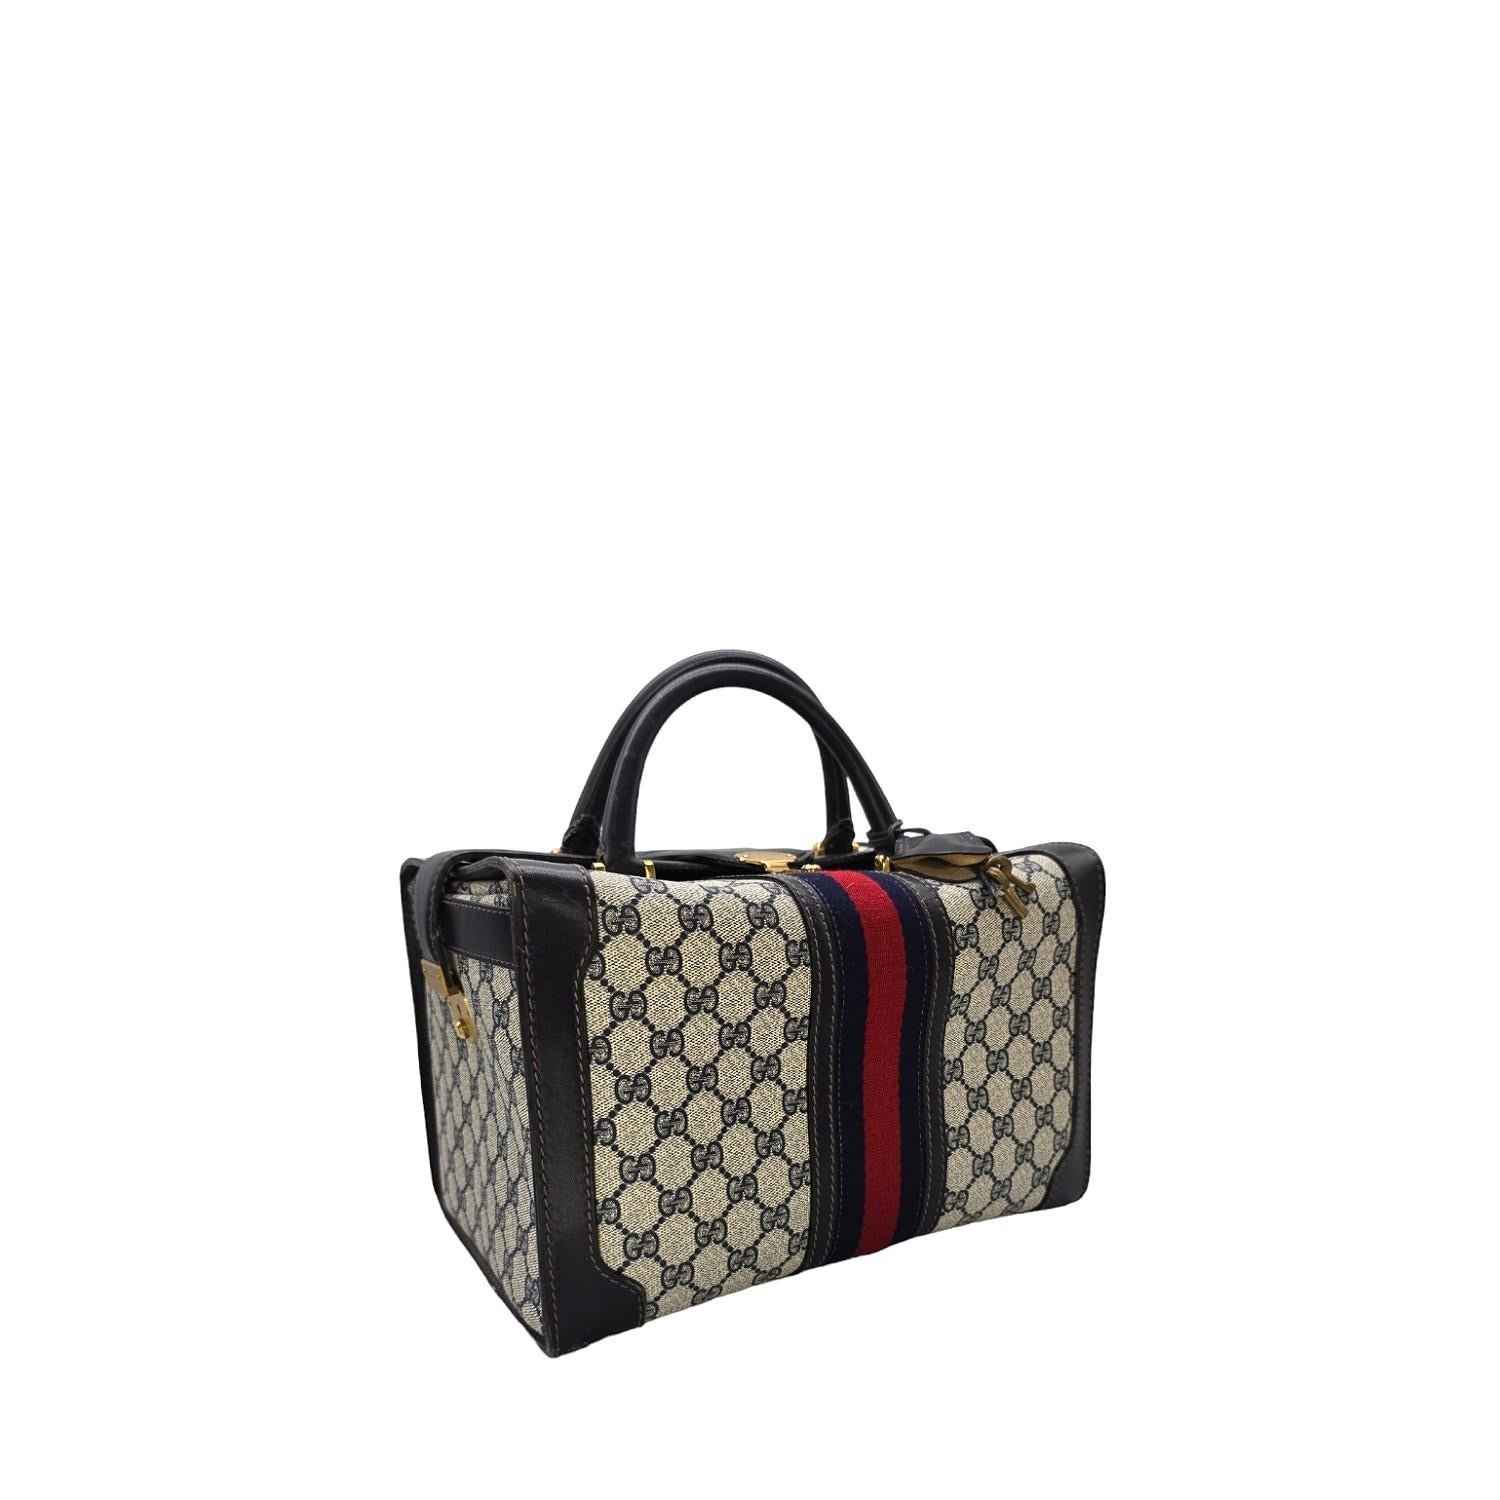 Indulge in luxury with the rare Vintage Gucci 3-lock train case travel bag. Chic and sophisticated, it can also double as a handbag. The leather clochette and brass keys add an elegant touch, while the interior lined with tan leather exudes timeless